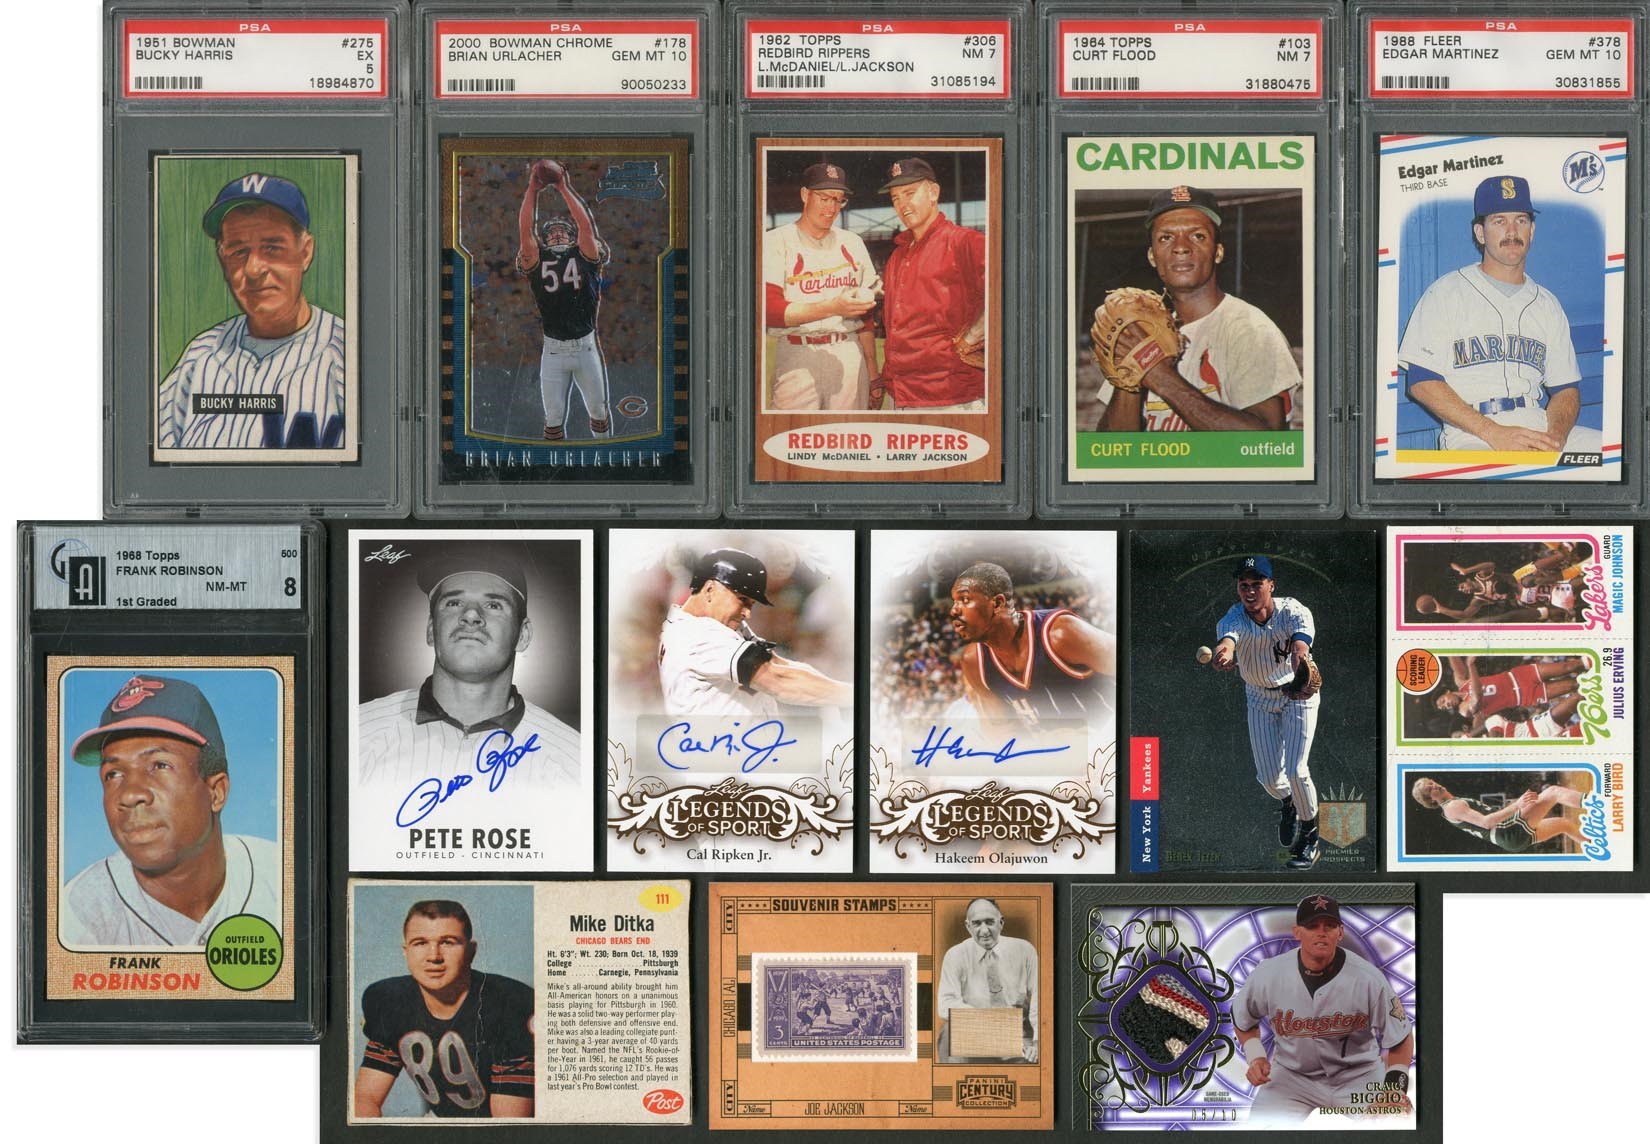 Baseball and Trading Cards - Massive Multi-Sport Card Autograph, Memorabilia & Rookie Collection (2,000+)